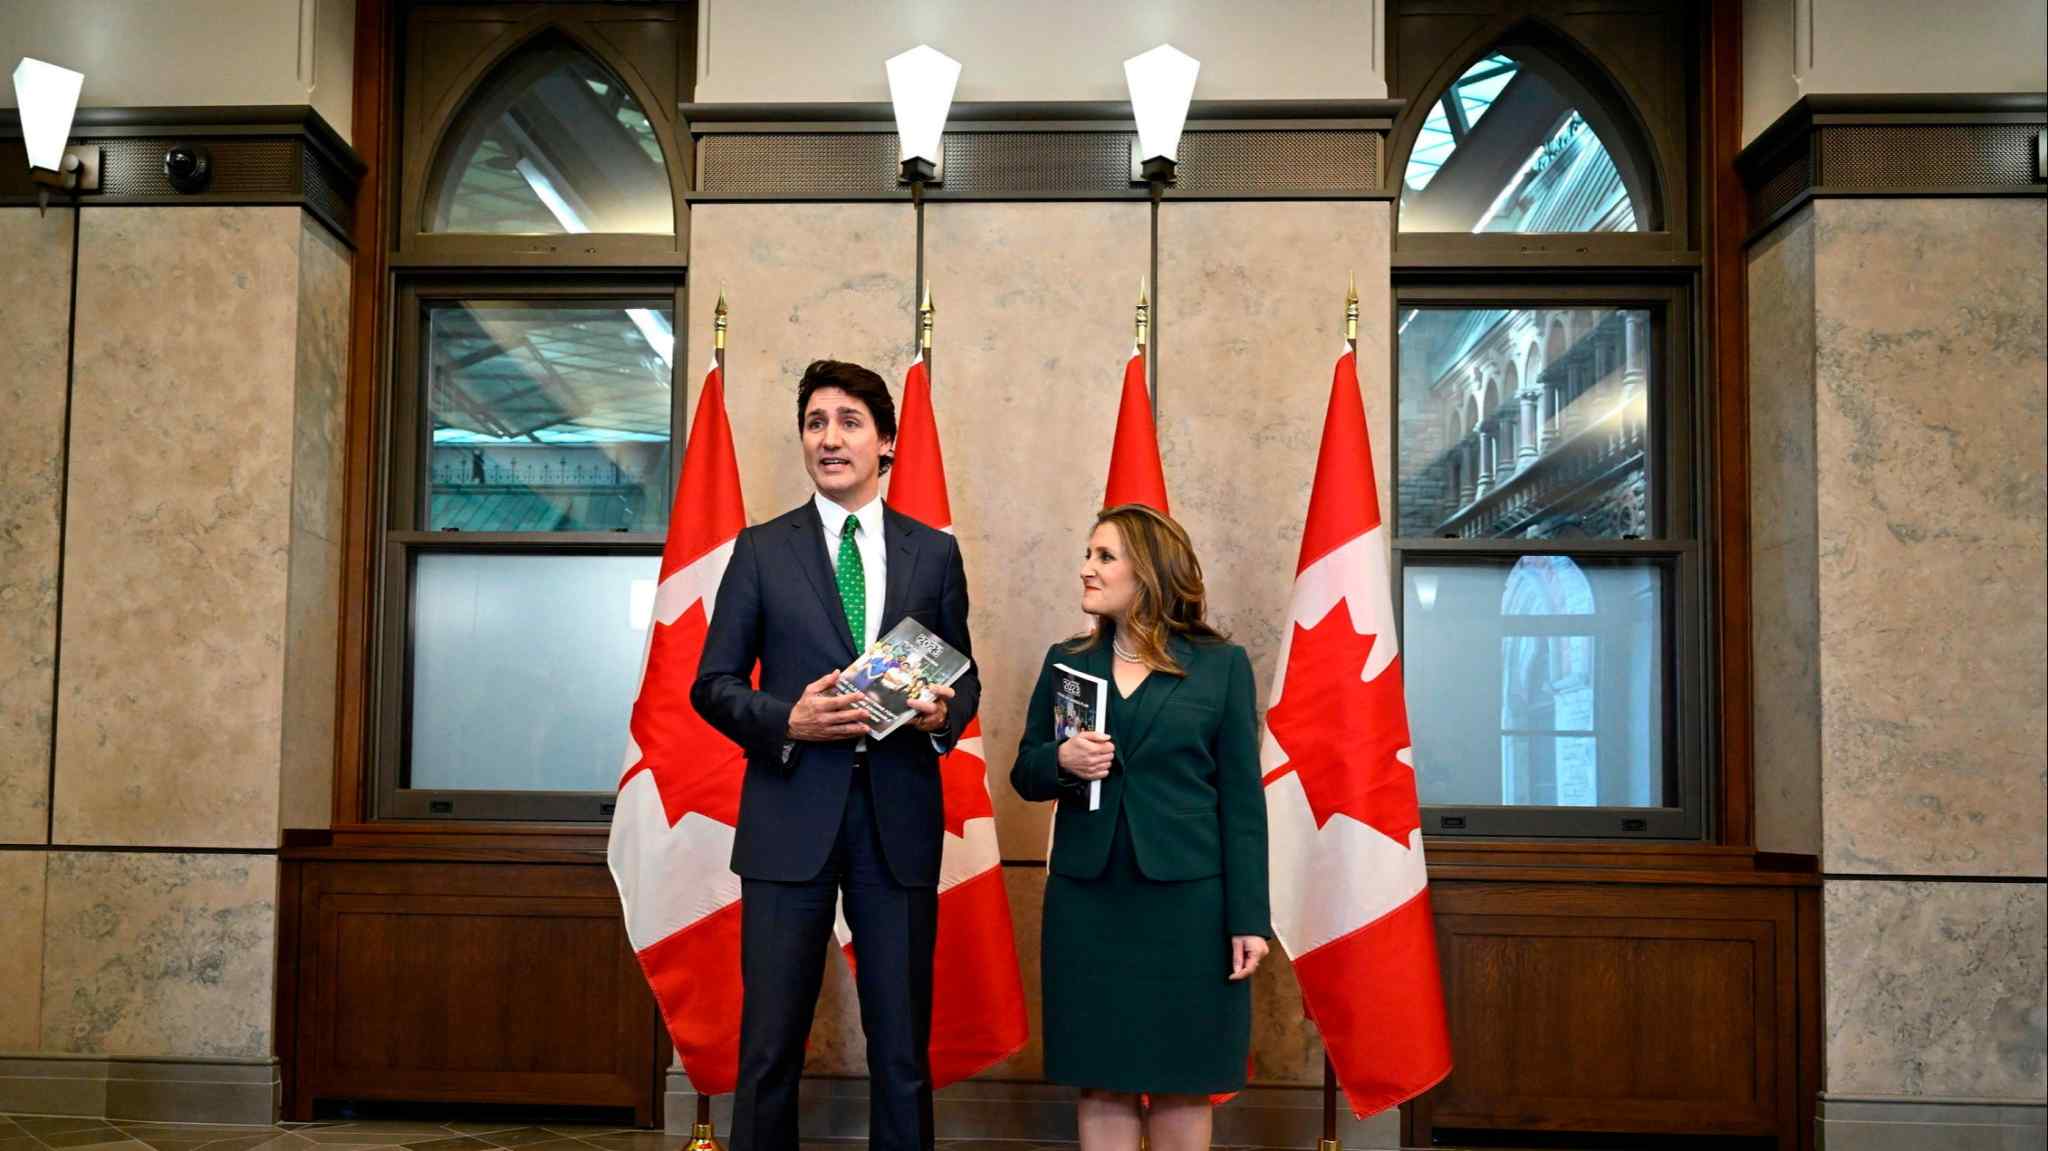 Live news: Canada proposes tax credits to boost critical minerals production